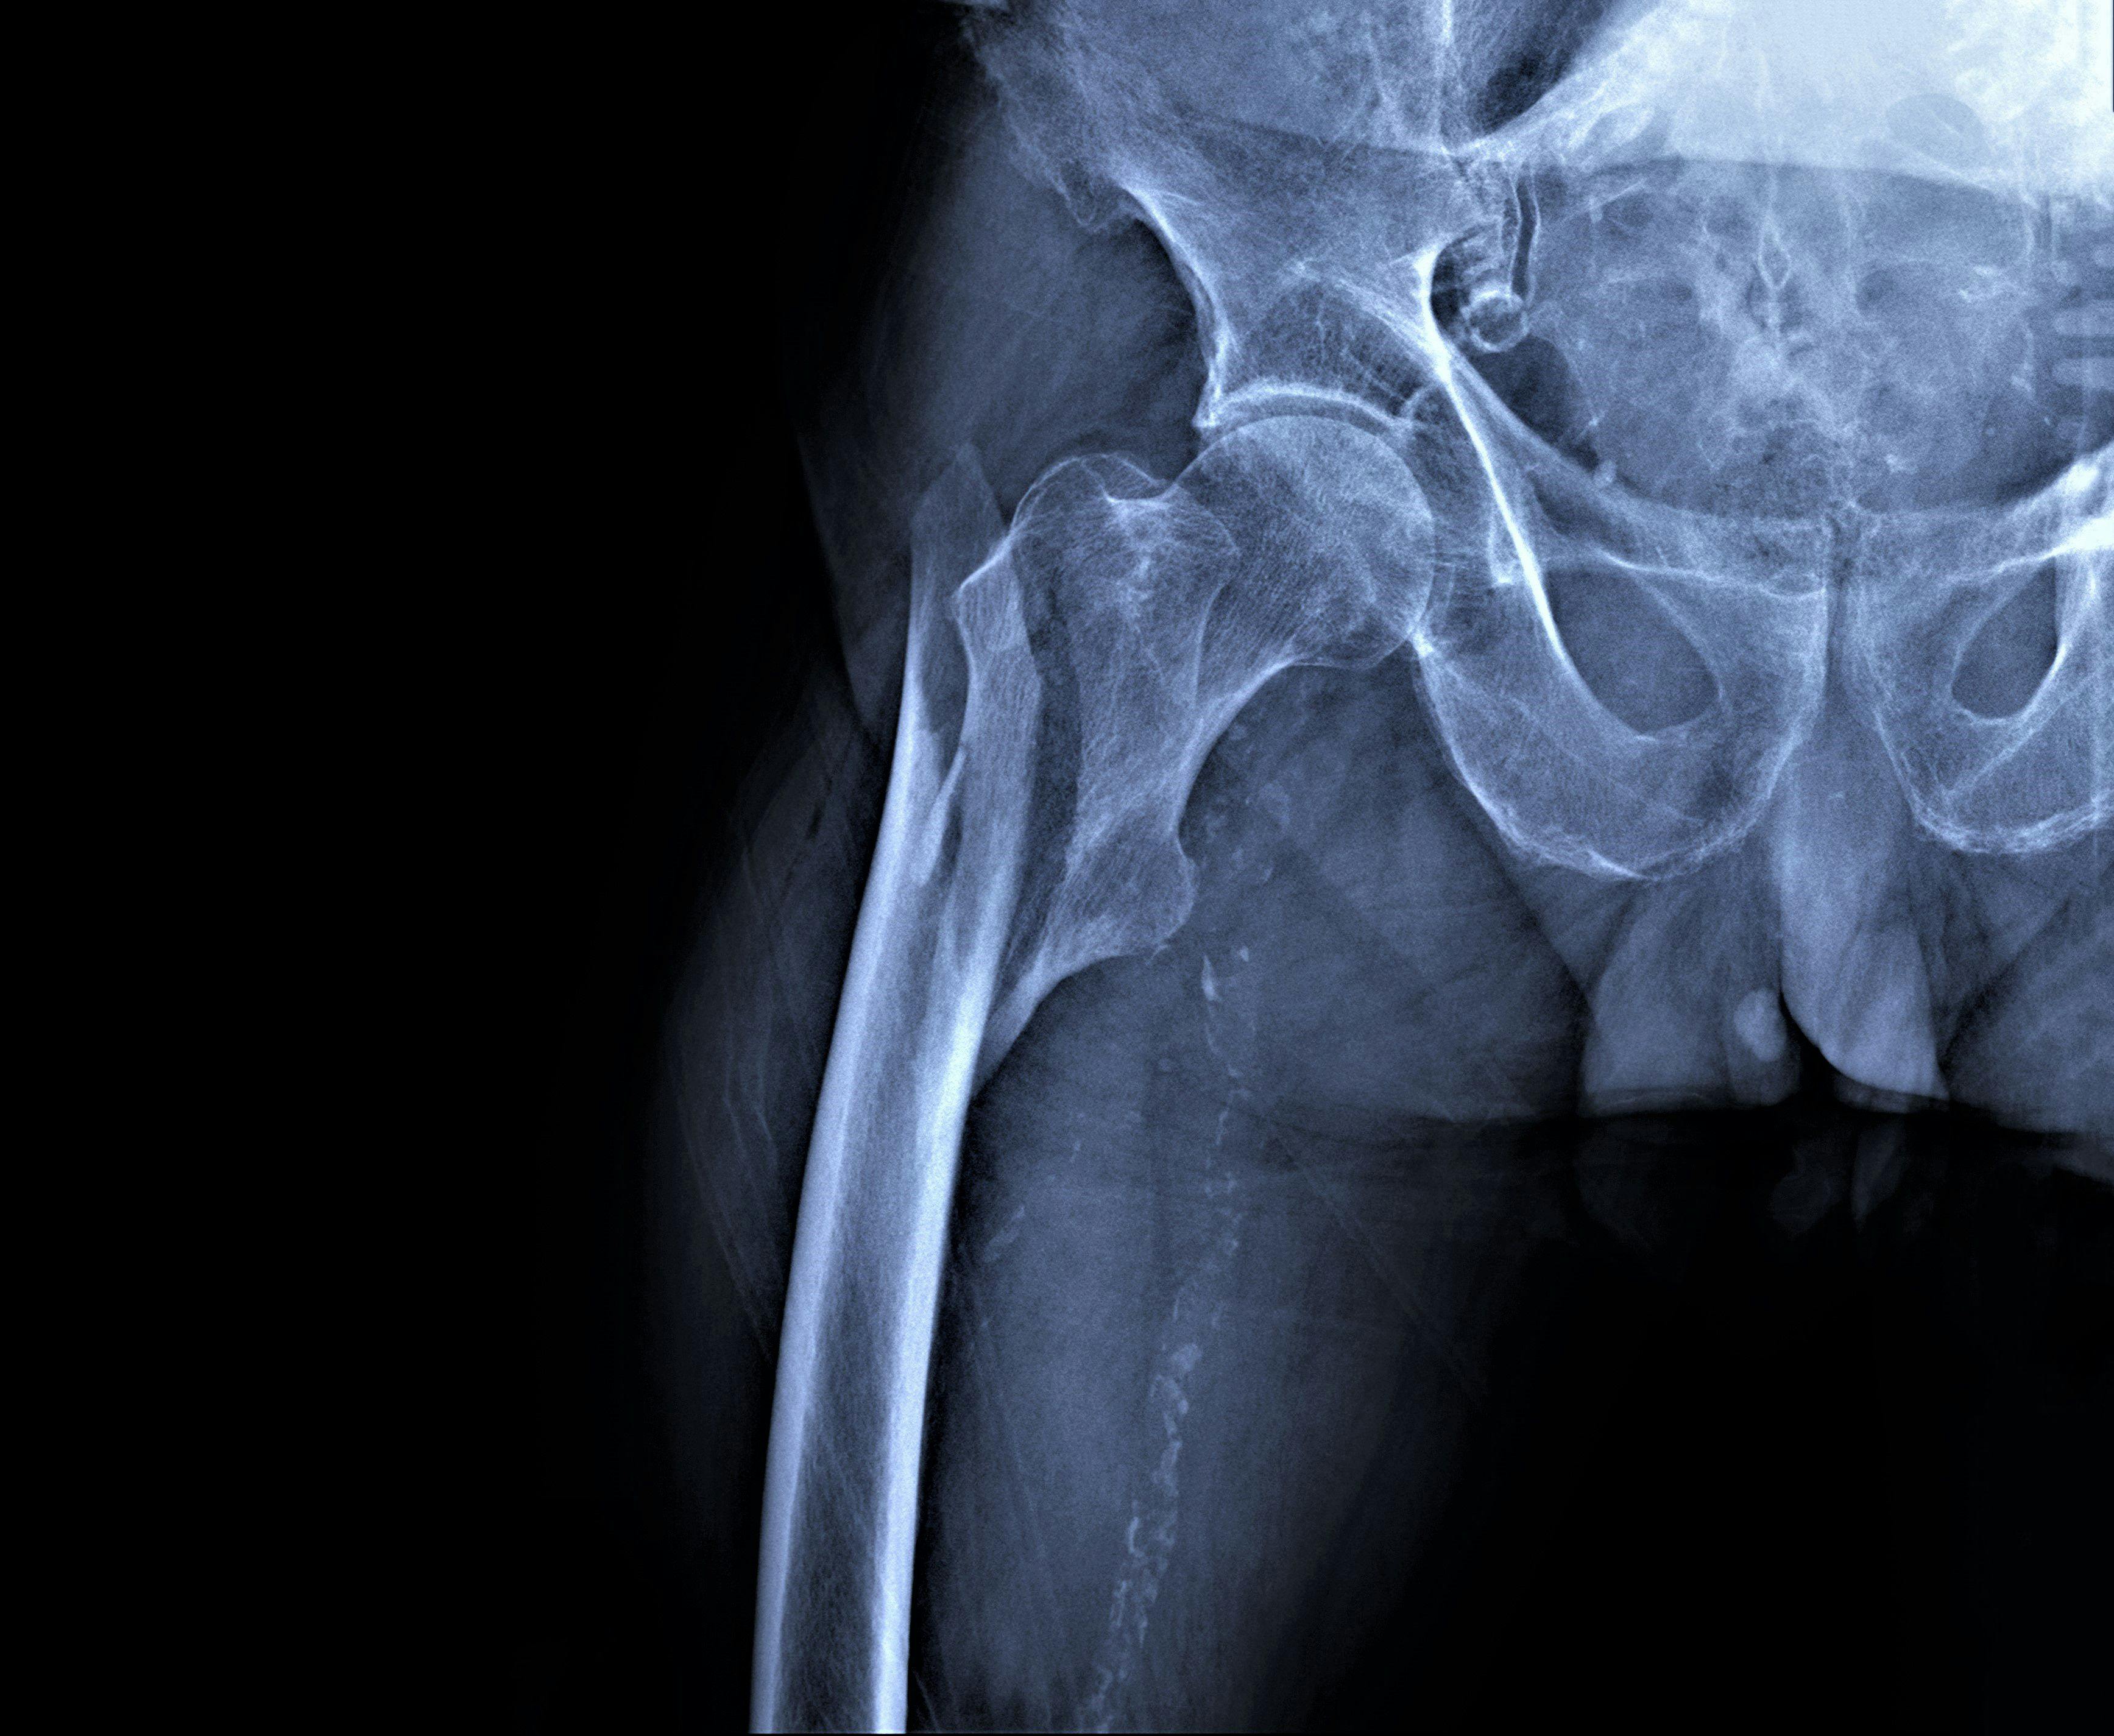 Study finds global hip fractures expected to double by 2050